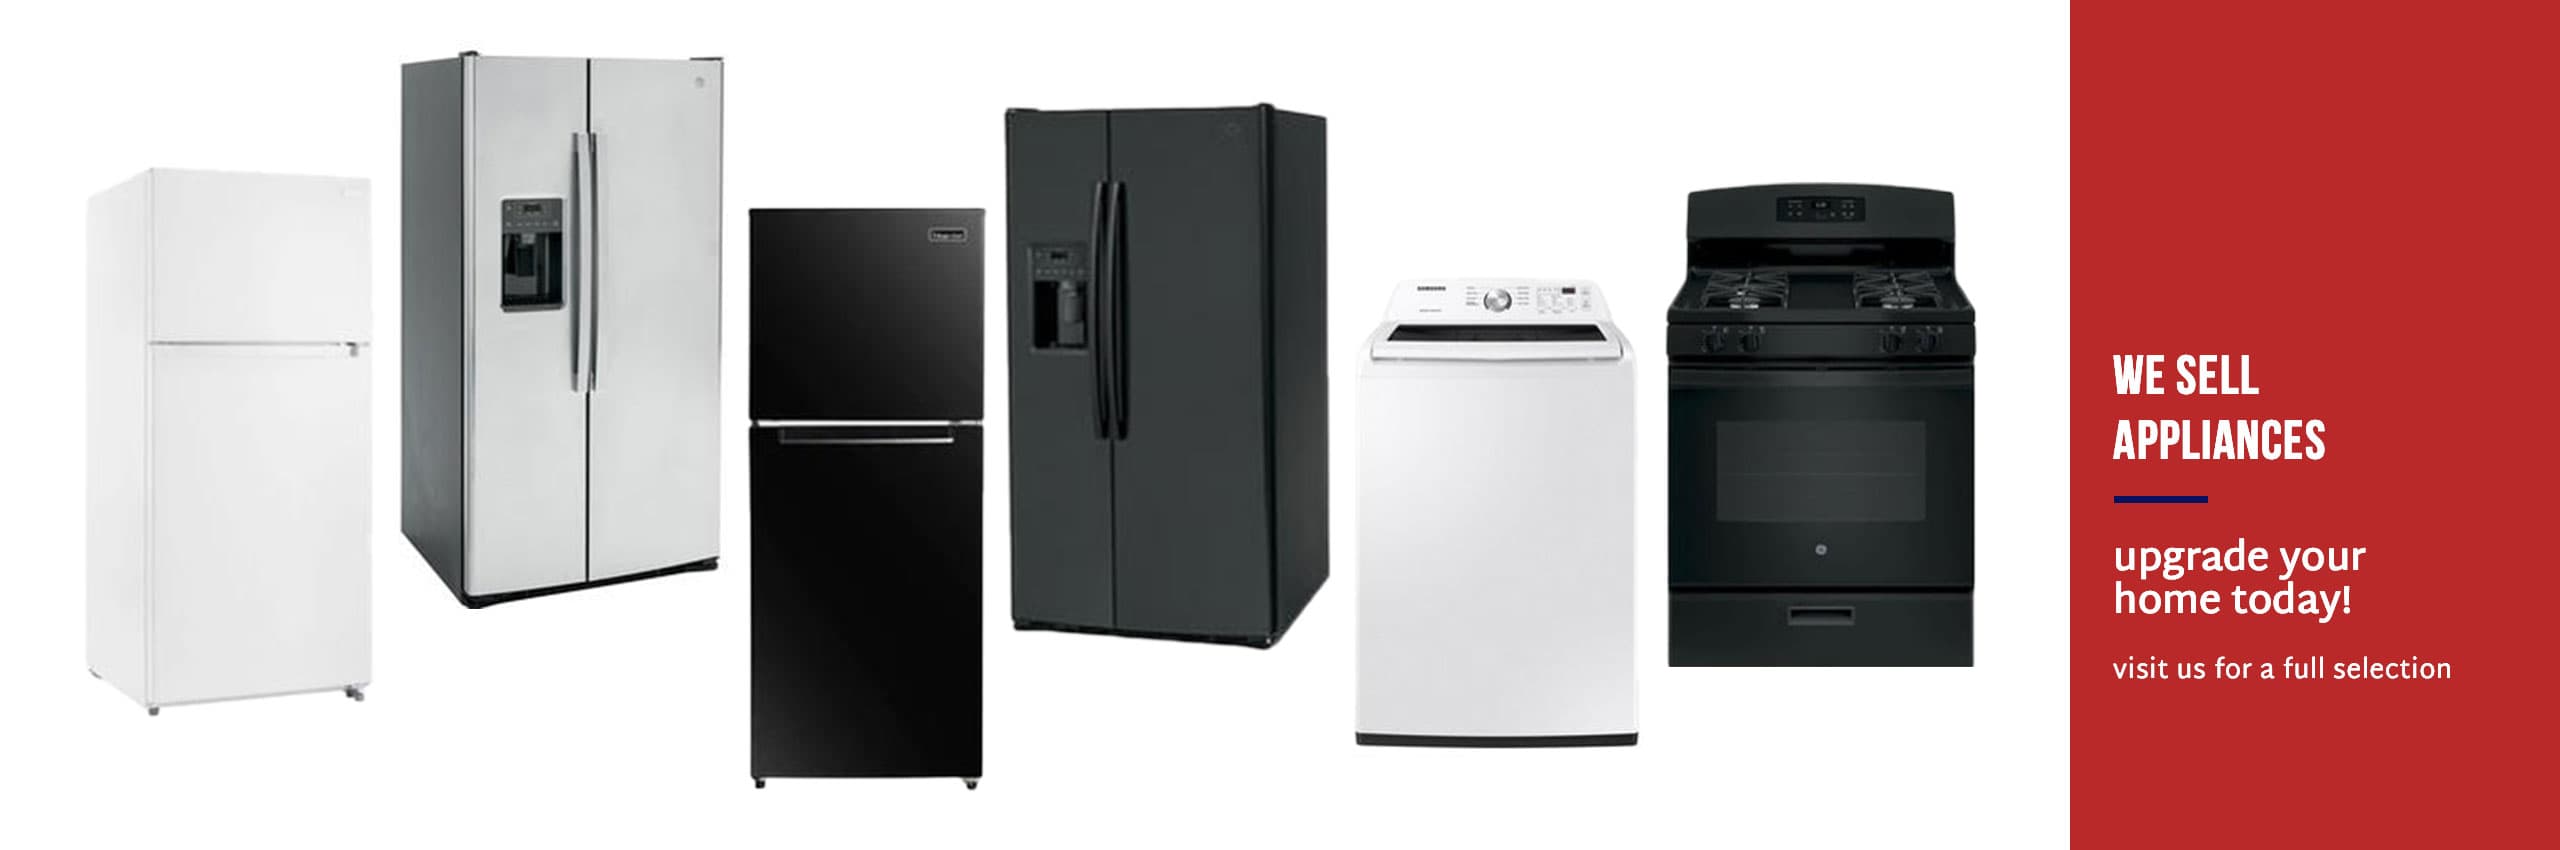 We sell appliances